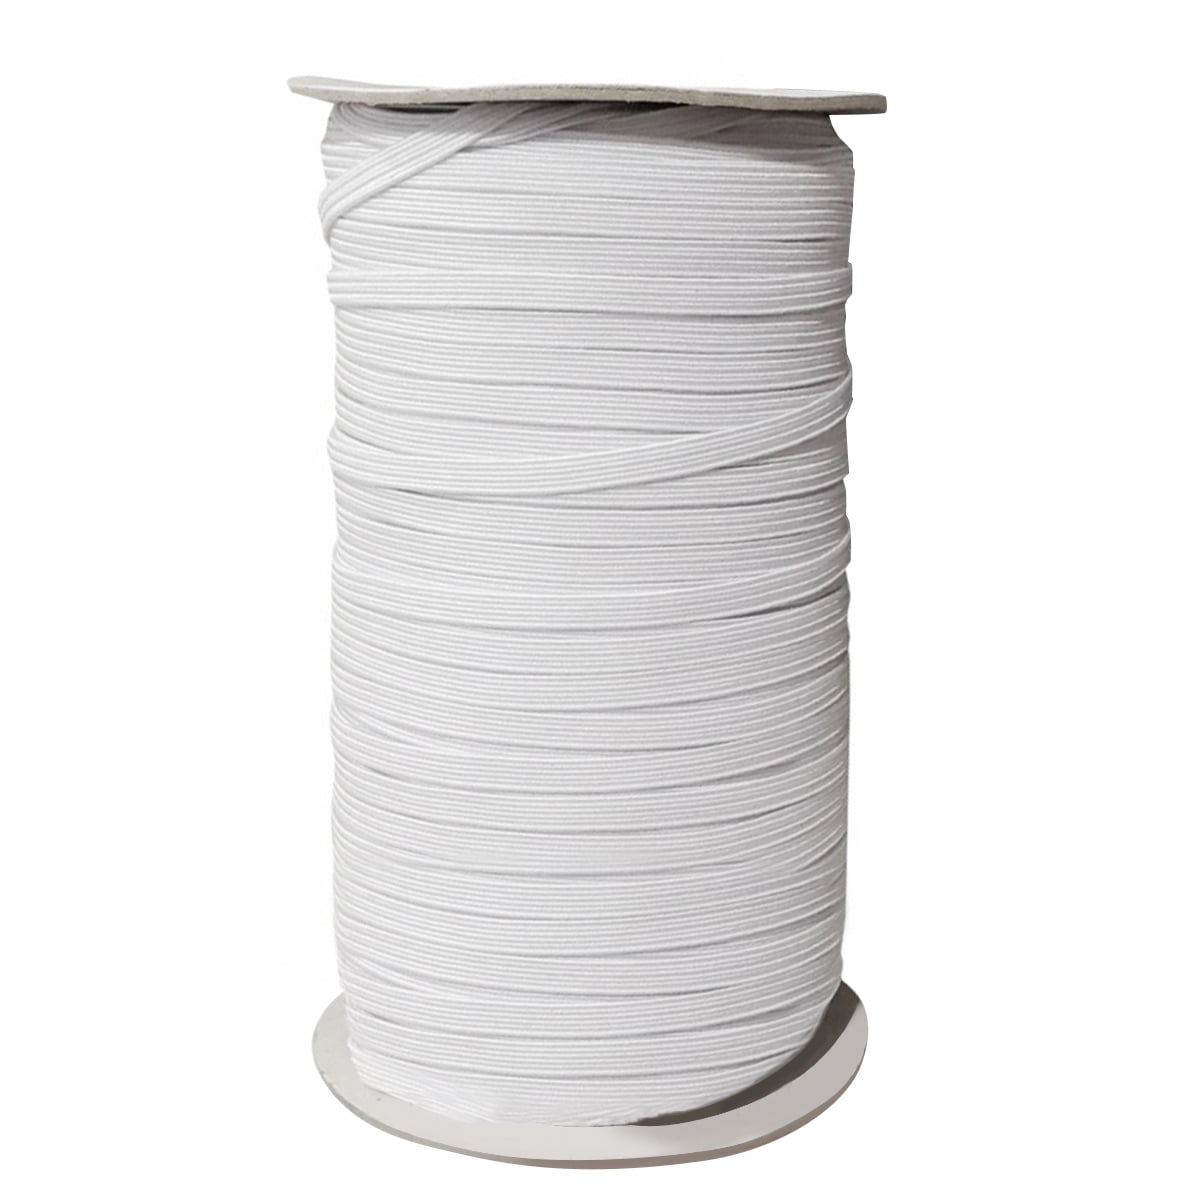 7mm POLYESTER Nylon BRAIDED WHITE CURTAIN BLIND PULL STRONG CORD  ROPE 